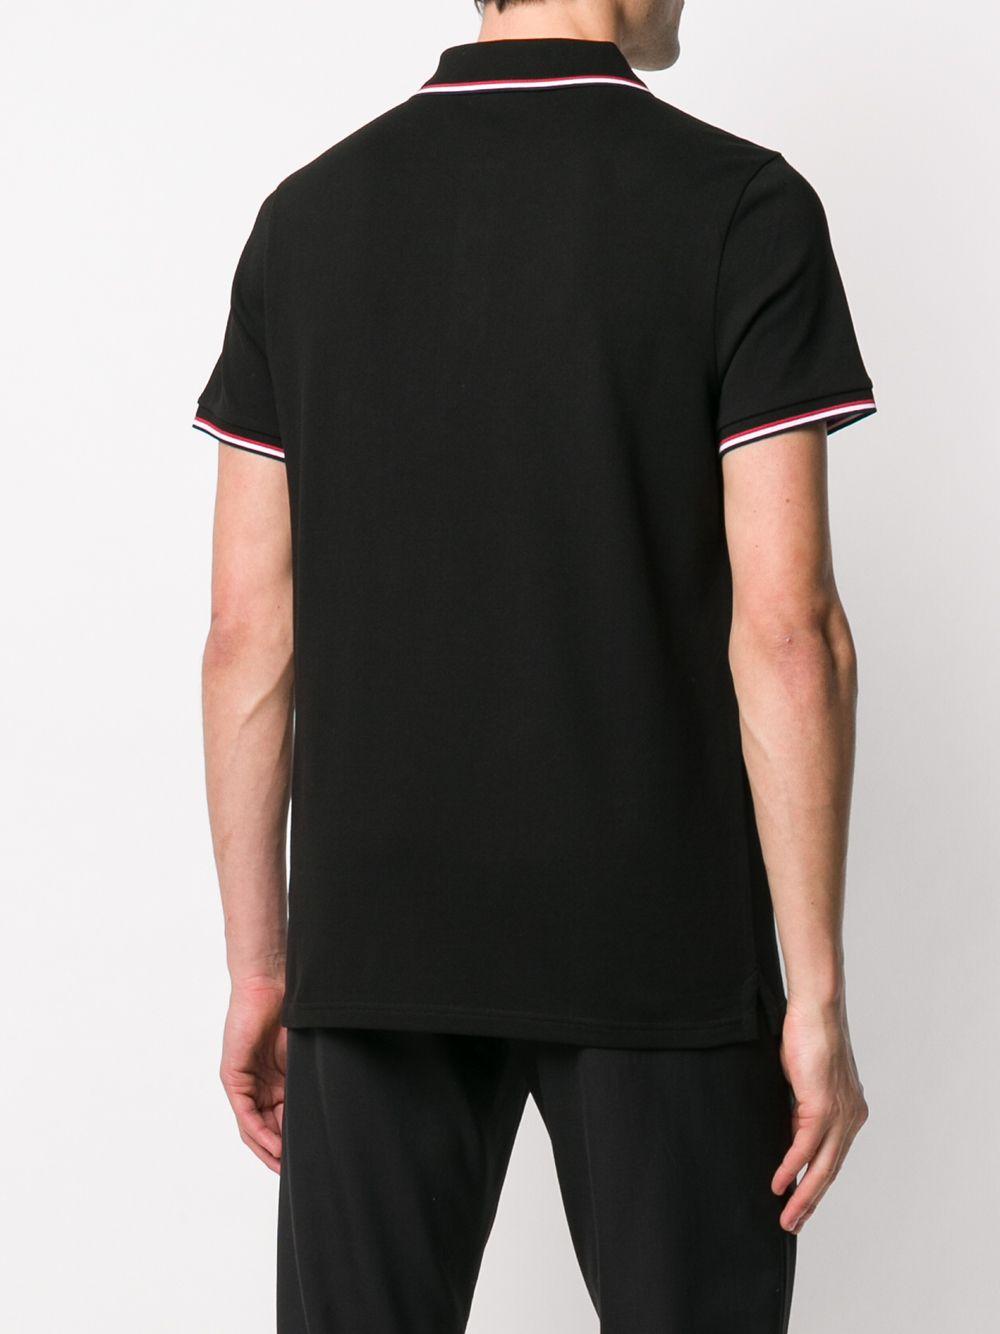 Moncler Cotton Classic Polo Shirt in Black for Men - Save 45% - Lyst